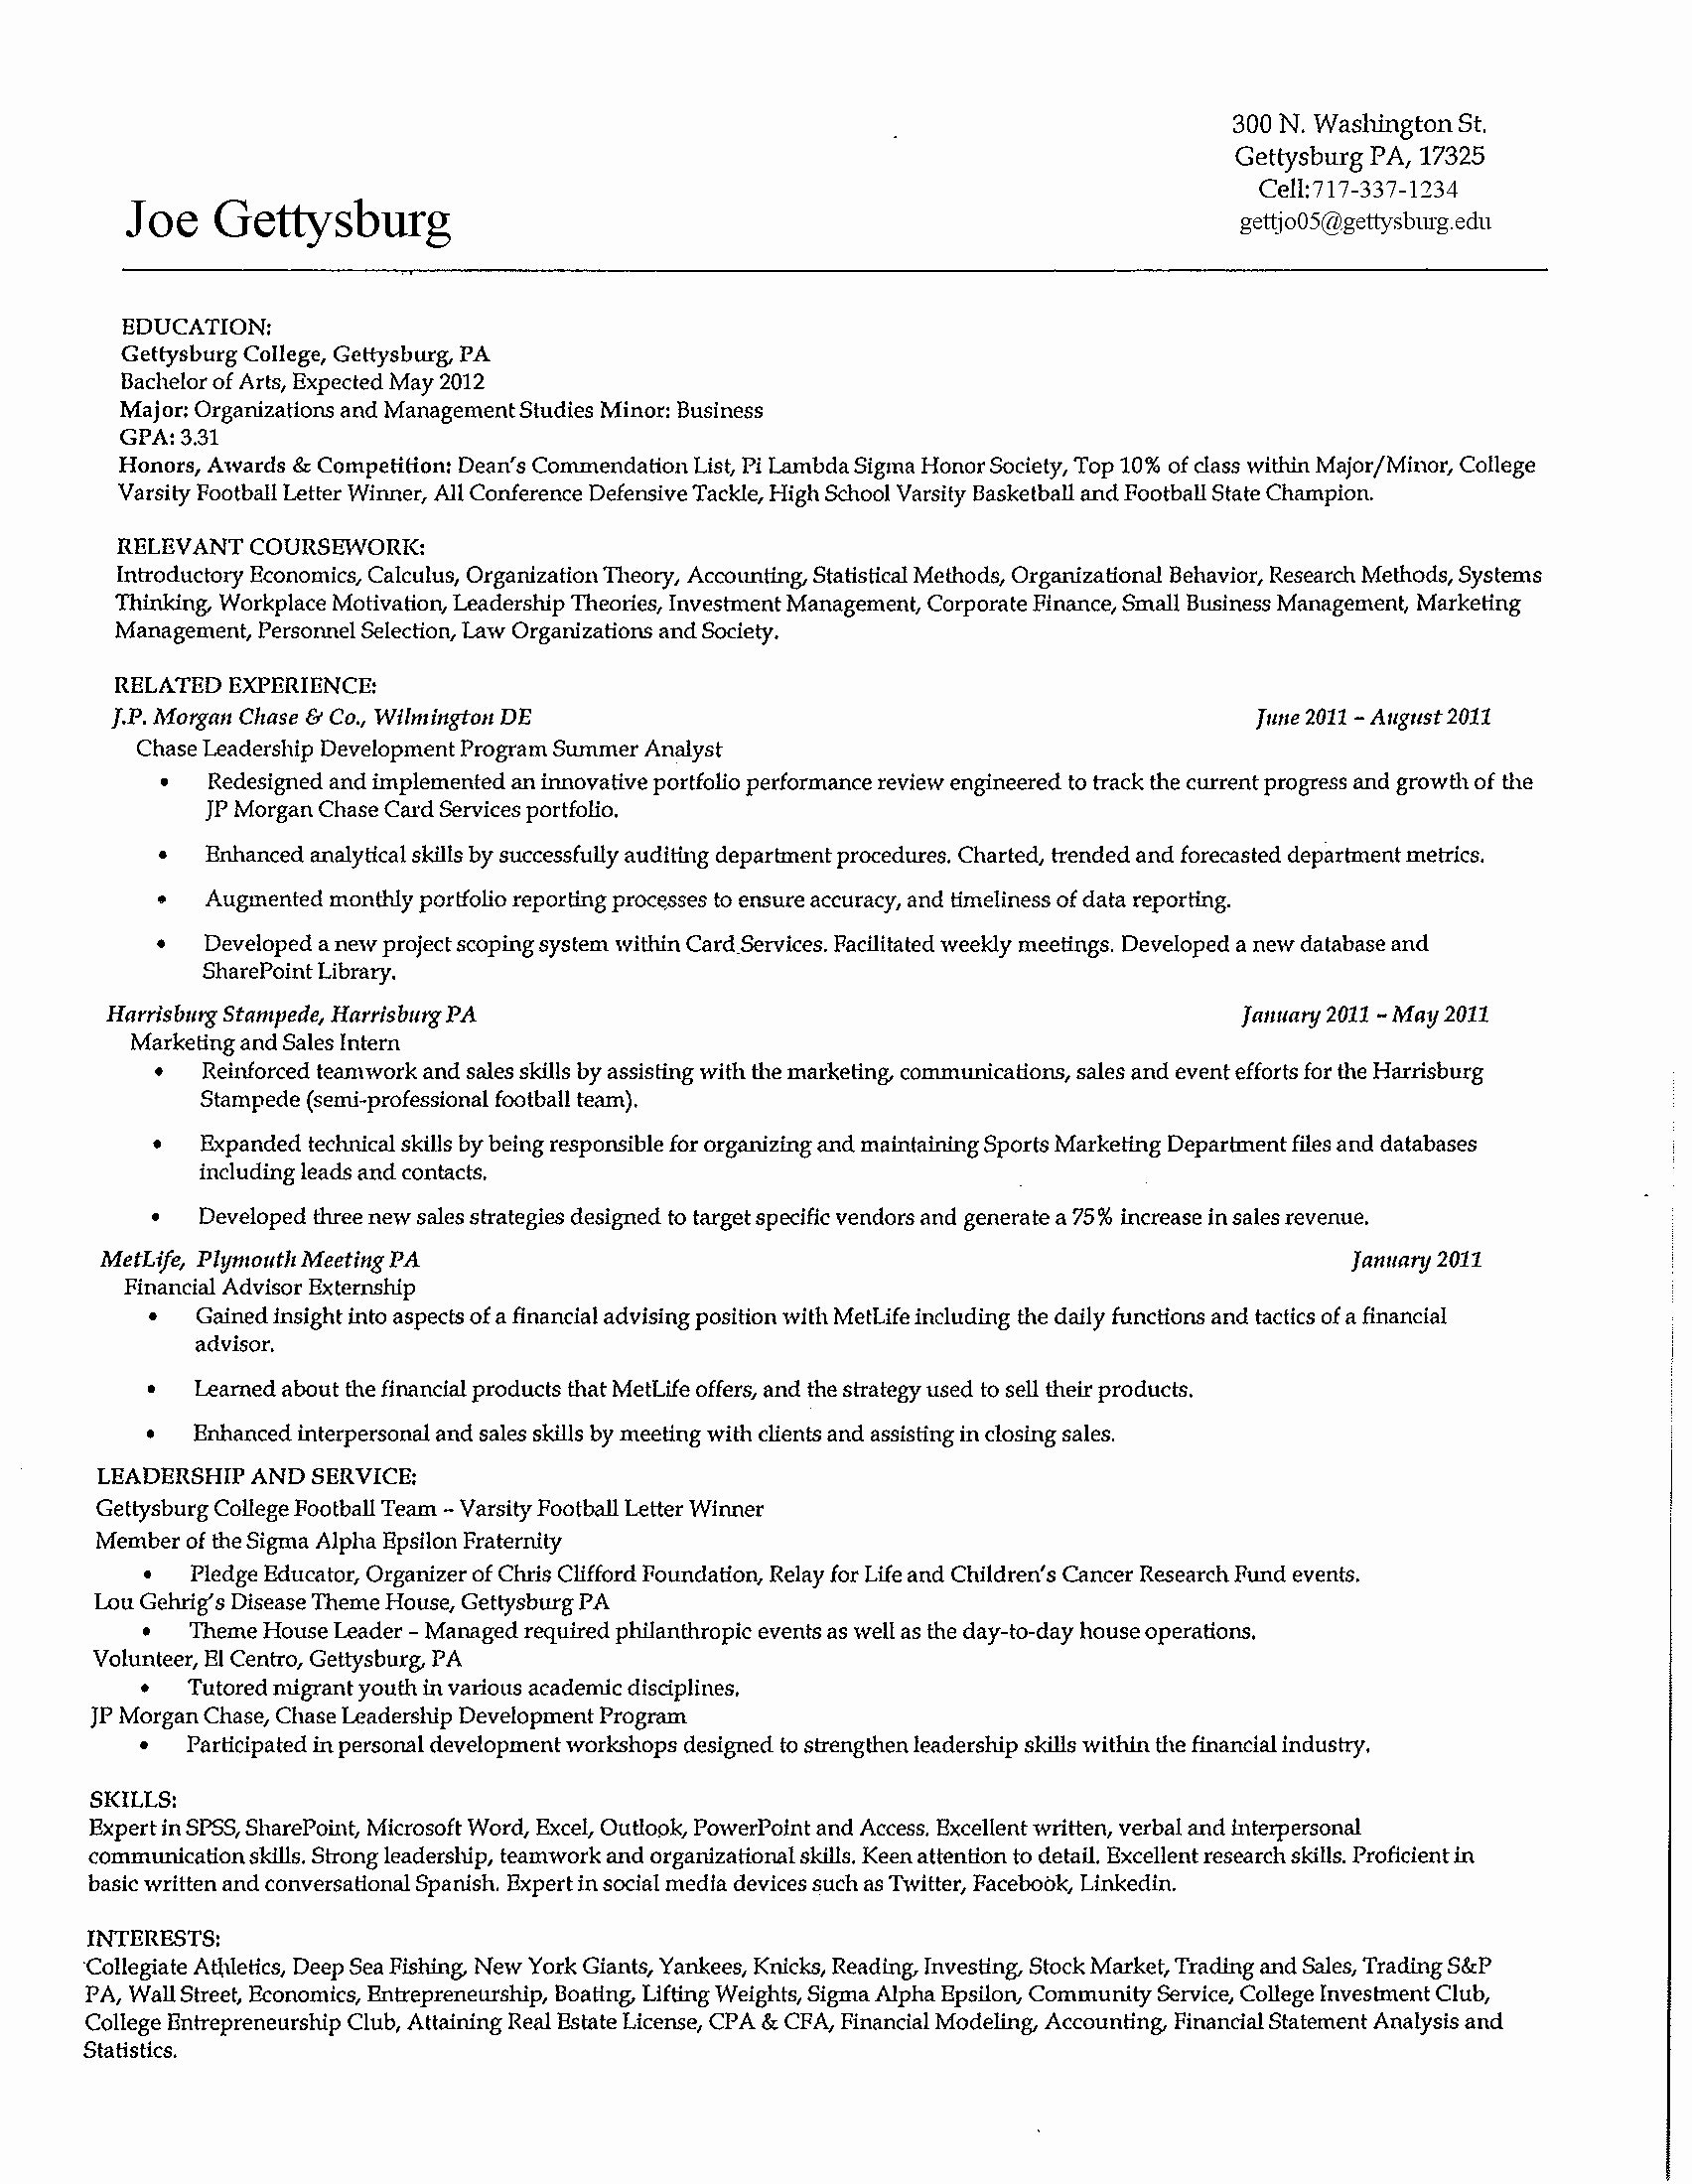 Essay First Resume Examples Objective Job format for